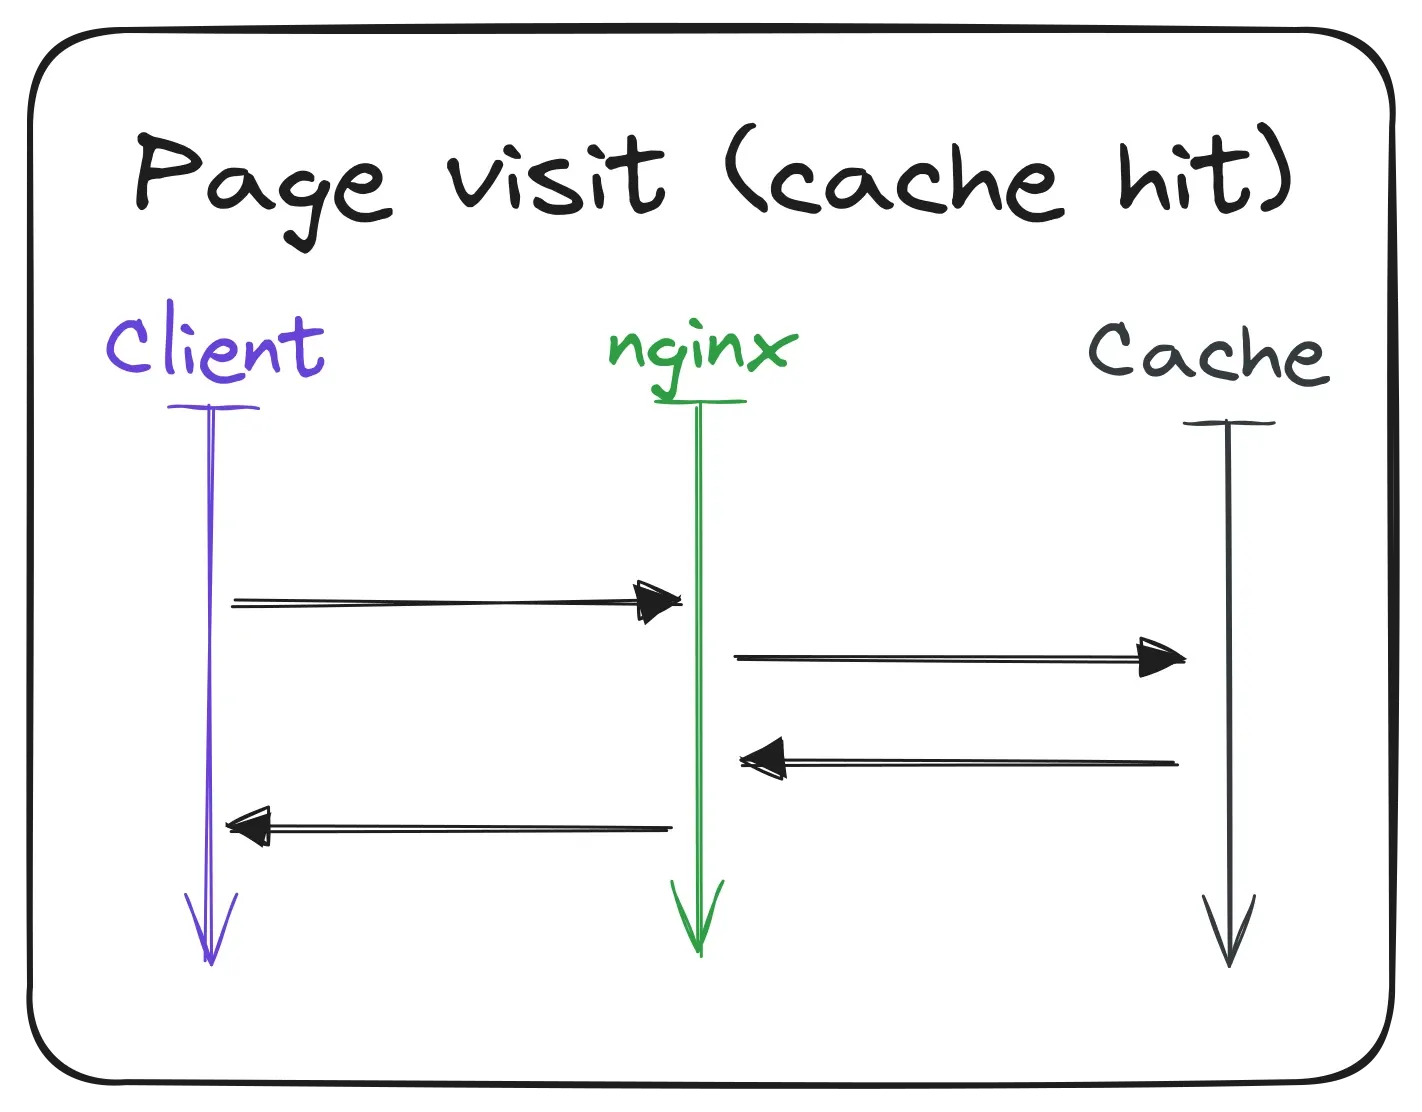 Traffic flow when the requested page is in the cache